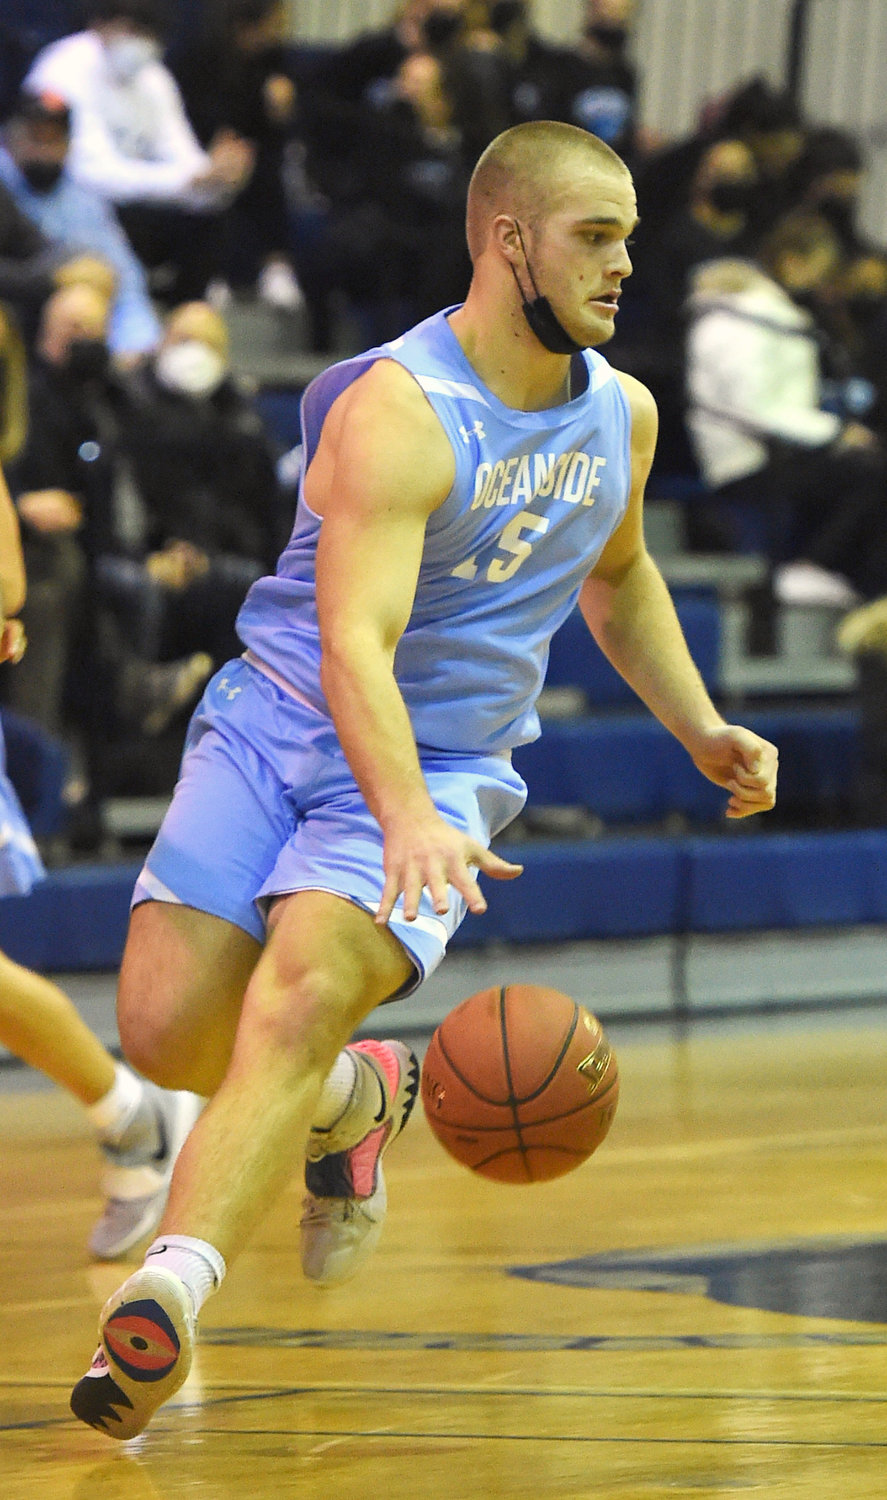 Junior Logan Lyson scored 17 points Jan. 12 to help the Sailors defeat visiting Uniondale, 55-51, in a tight game from start to finish.